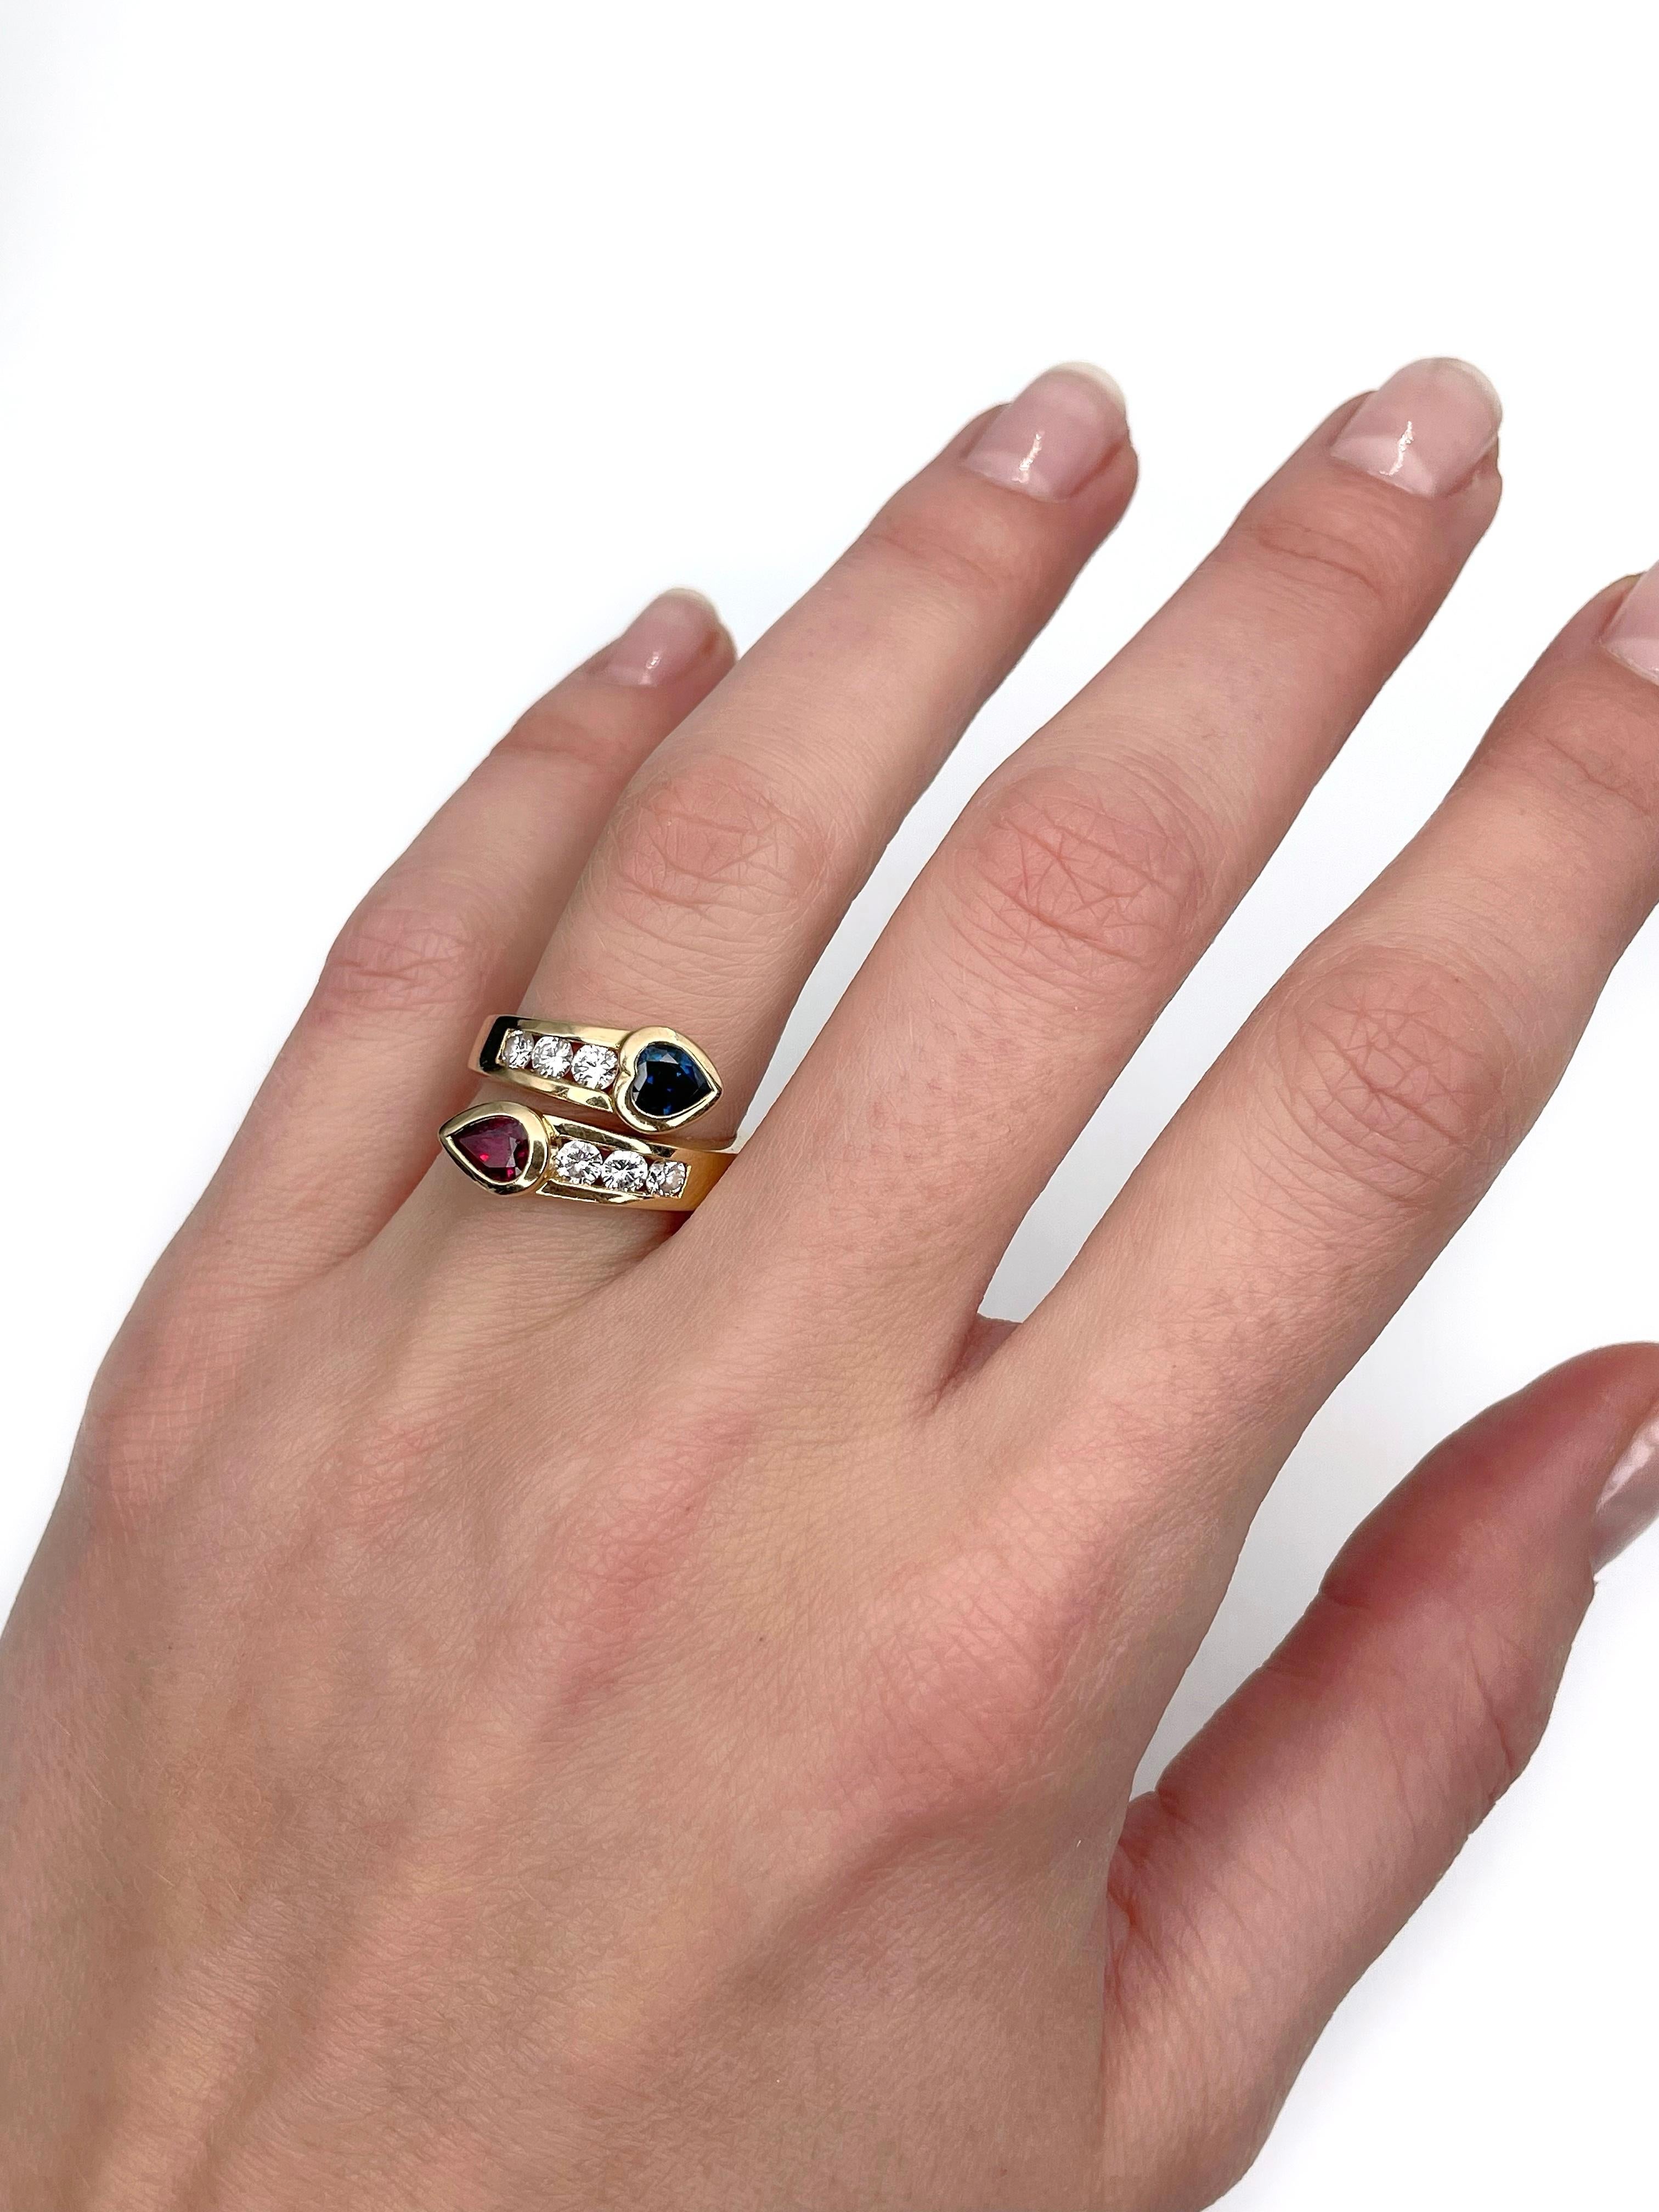 This is a modern design “Toi et moi” engagement ring designed by Spanish jewellery brand “Candame”. It is crafted in 18K gold. Circa 2000s. 

The piece features:
- 1 ruby: pear cut, 0.50ct, slpR 6/4, SI
- 1 sapphire: heart cut, 0.50ct, B 7/4, VS
- 6